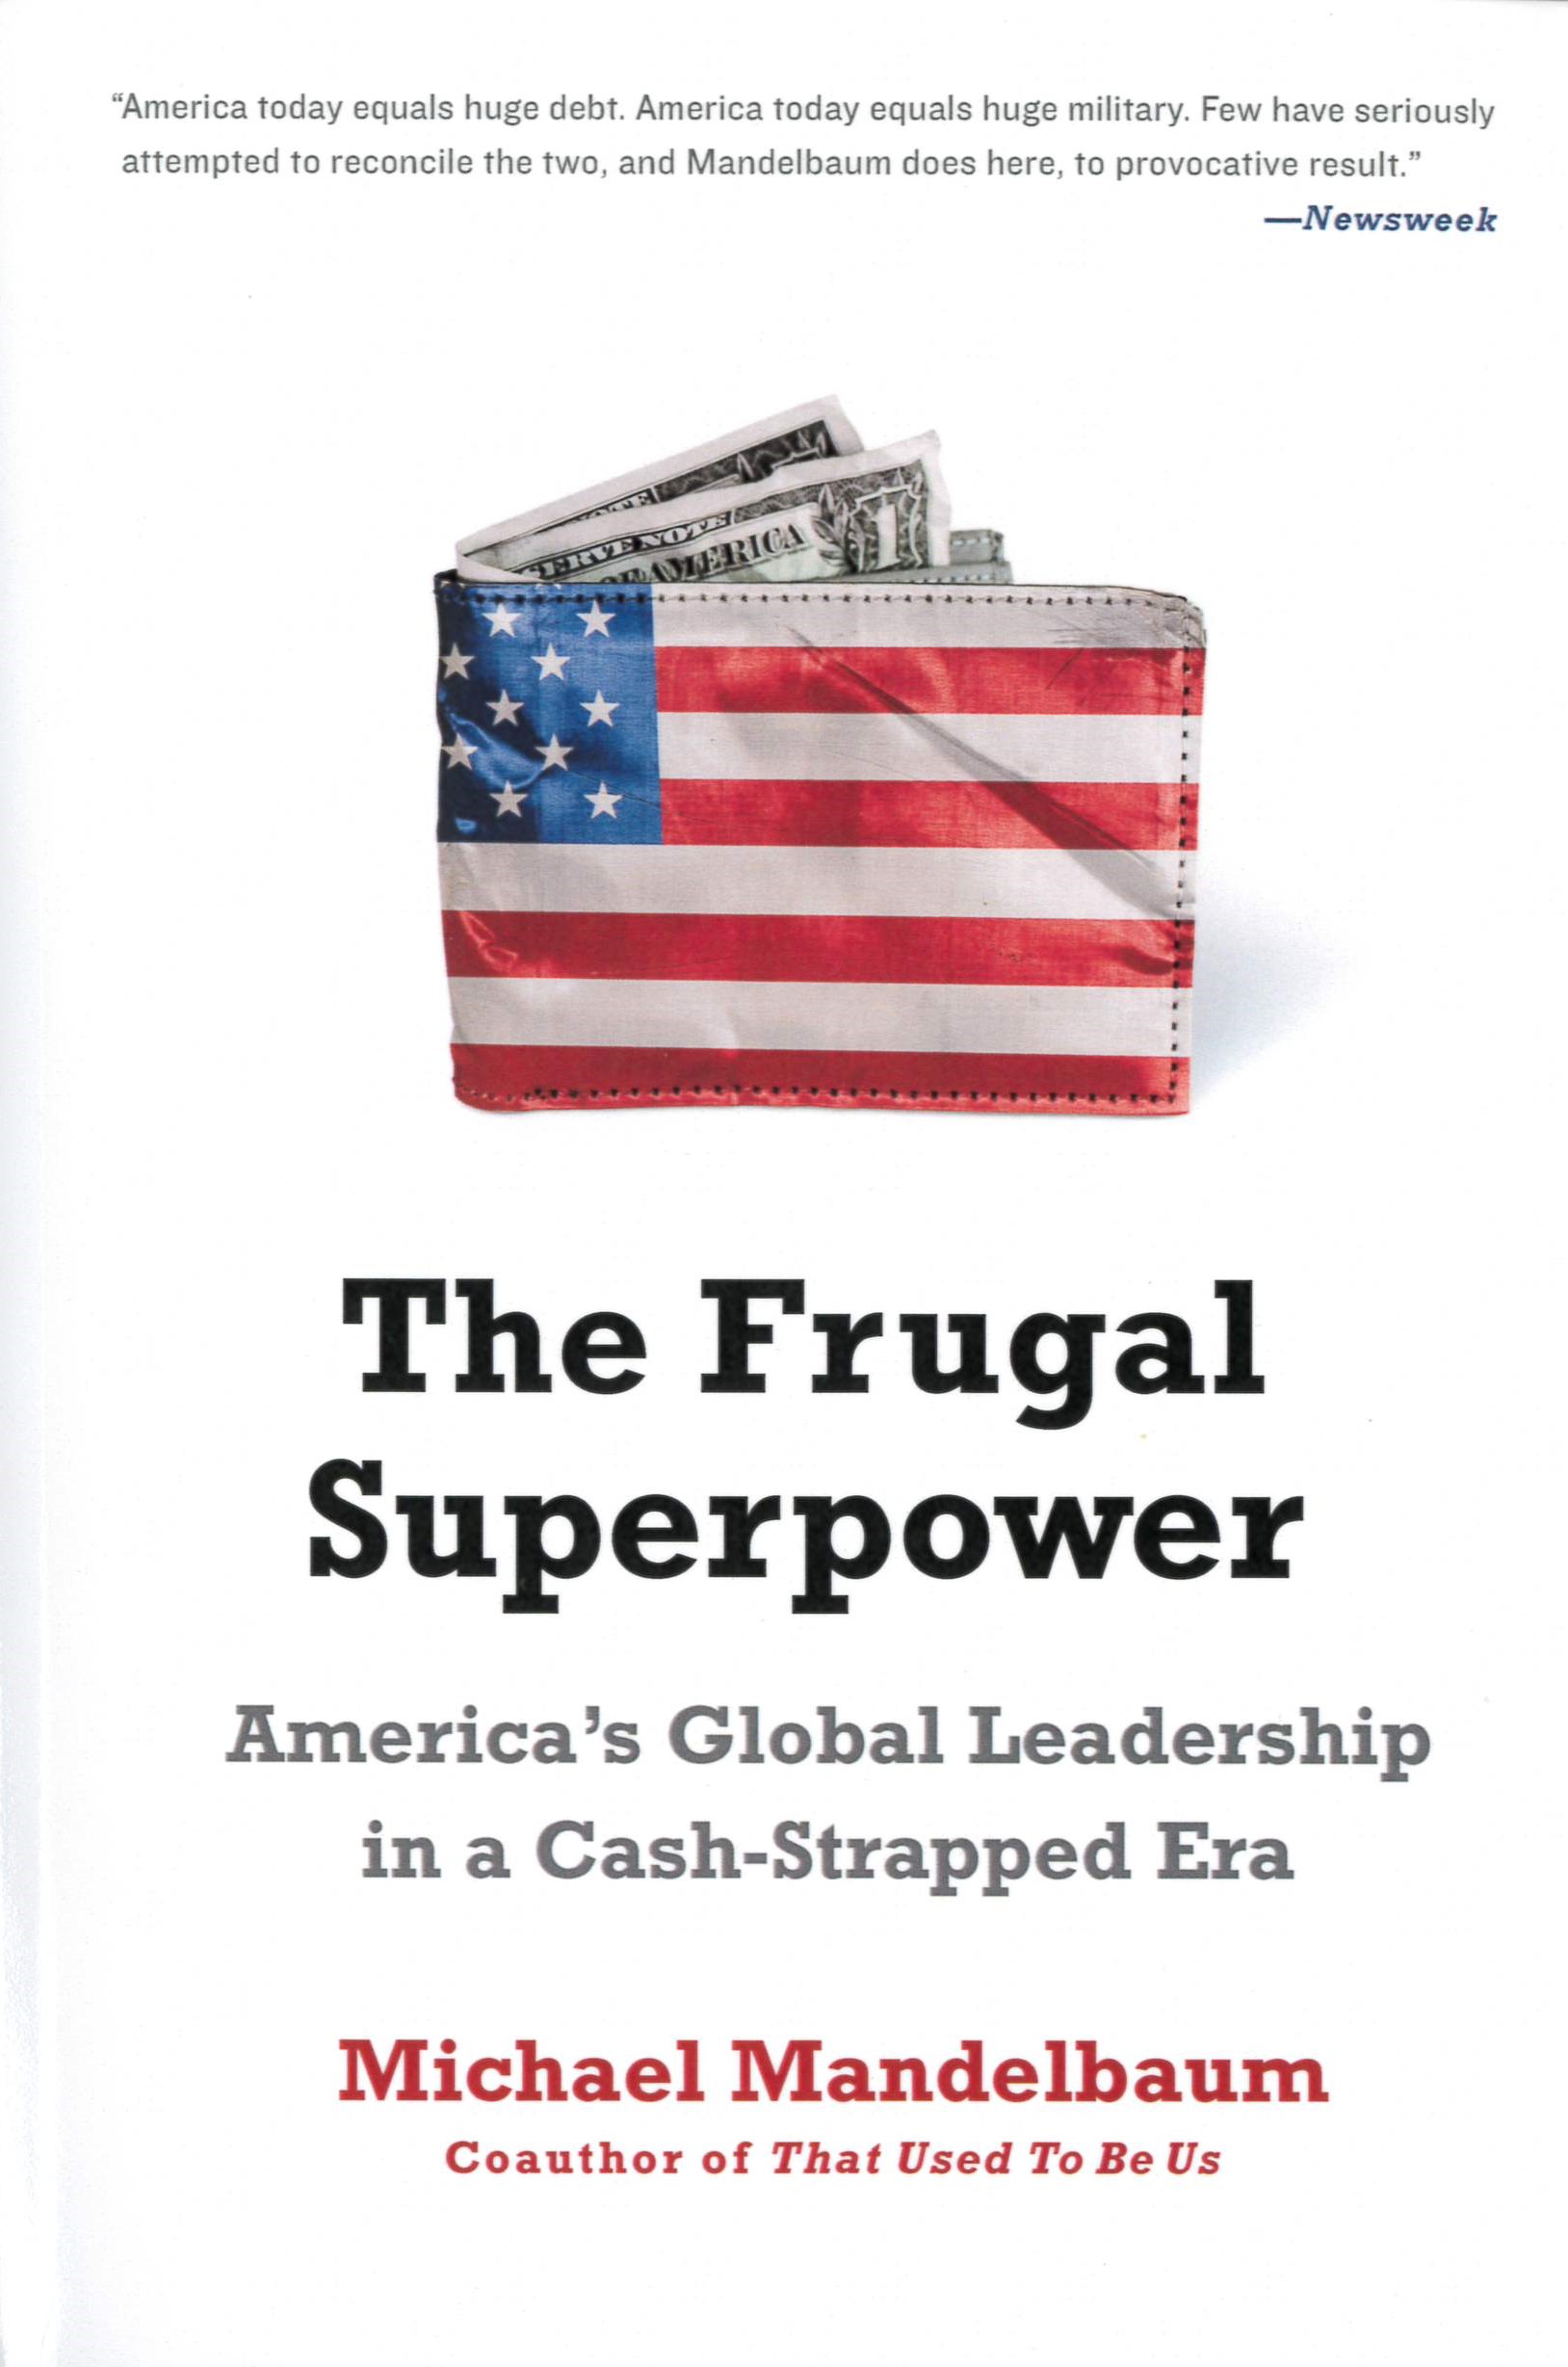 The frugal superpower : America